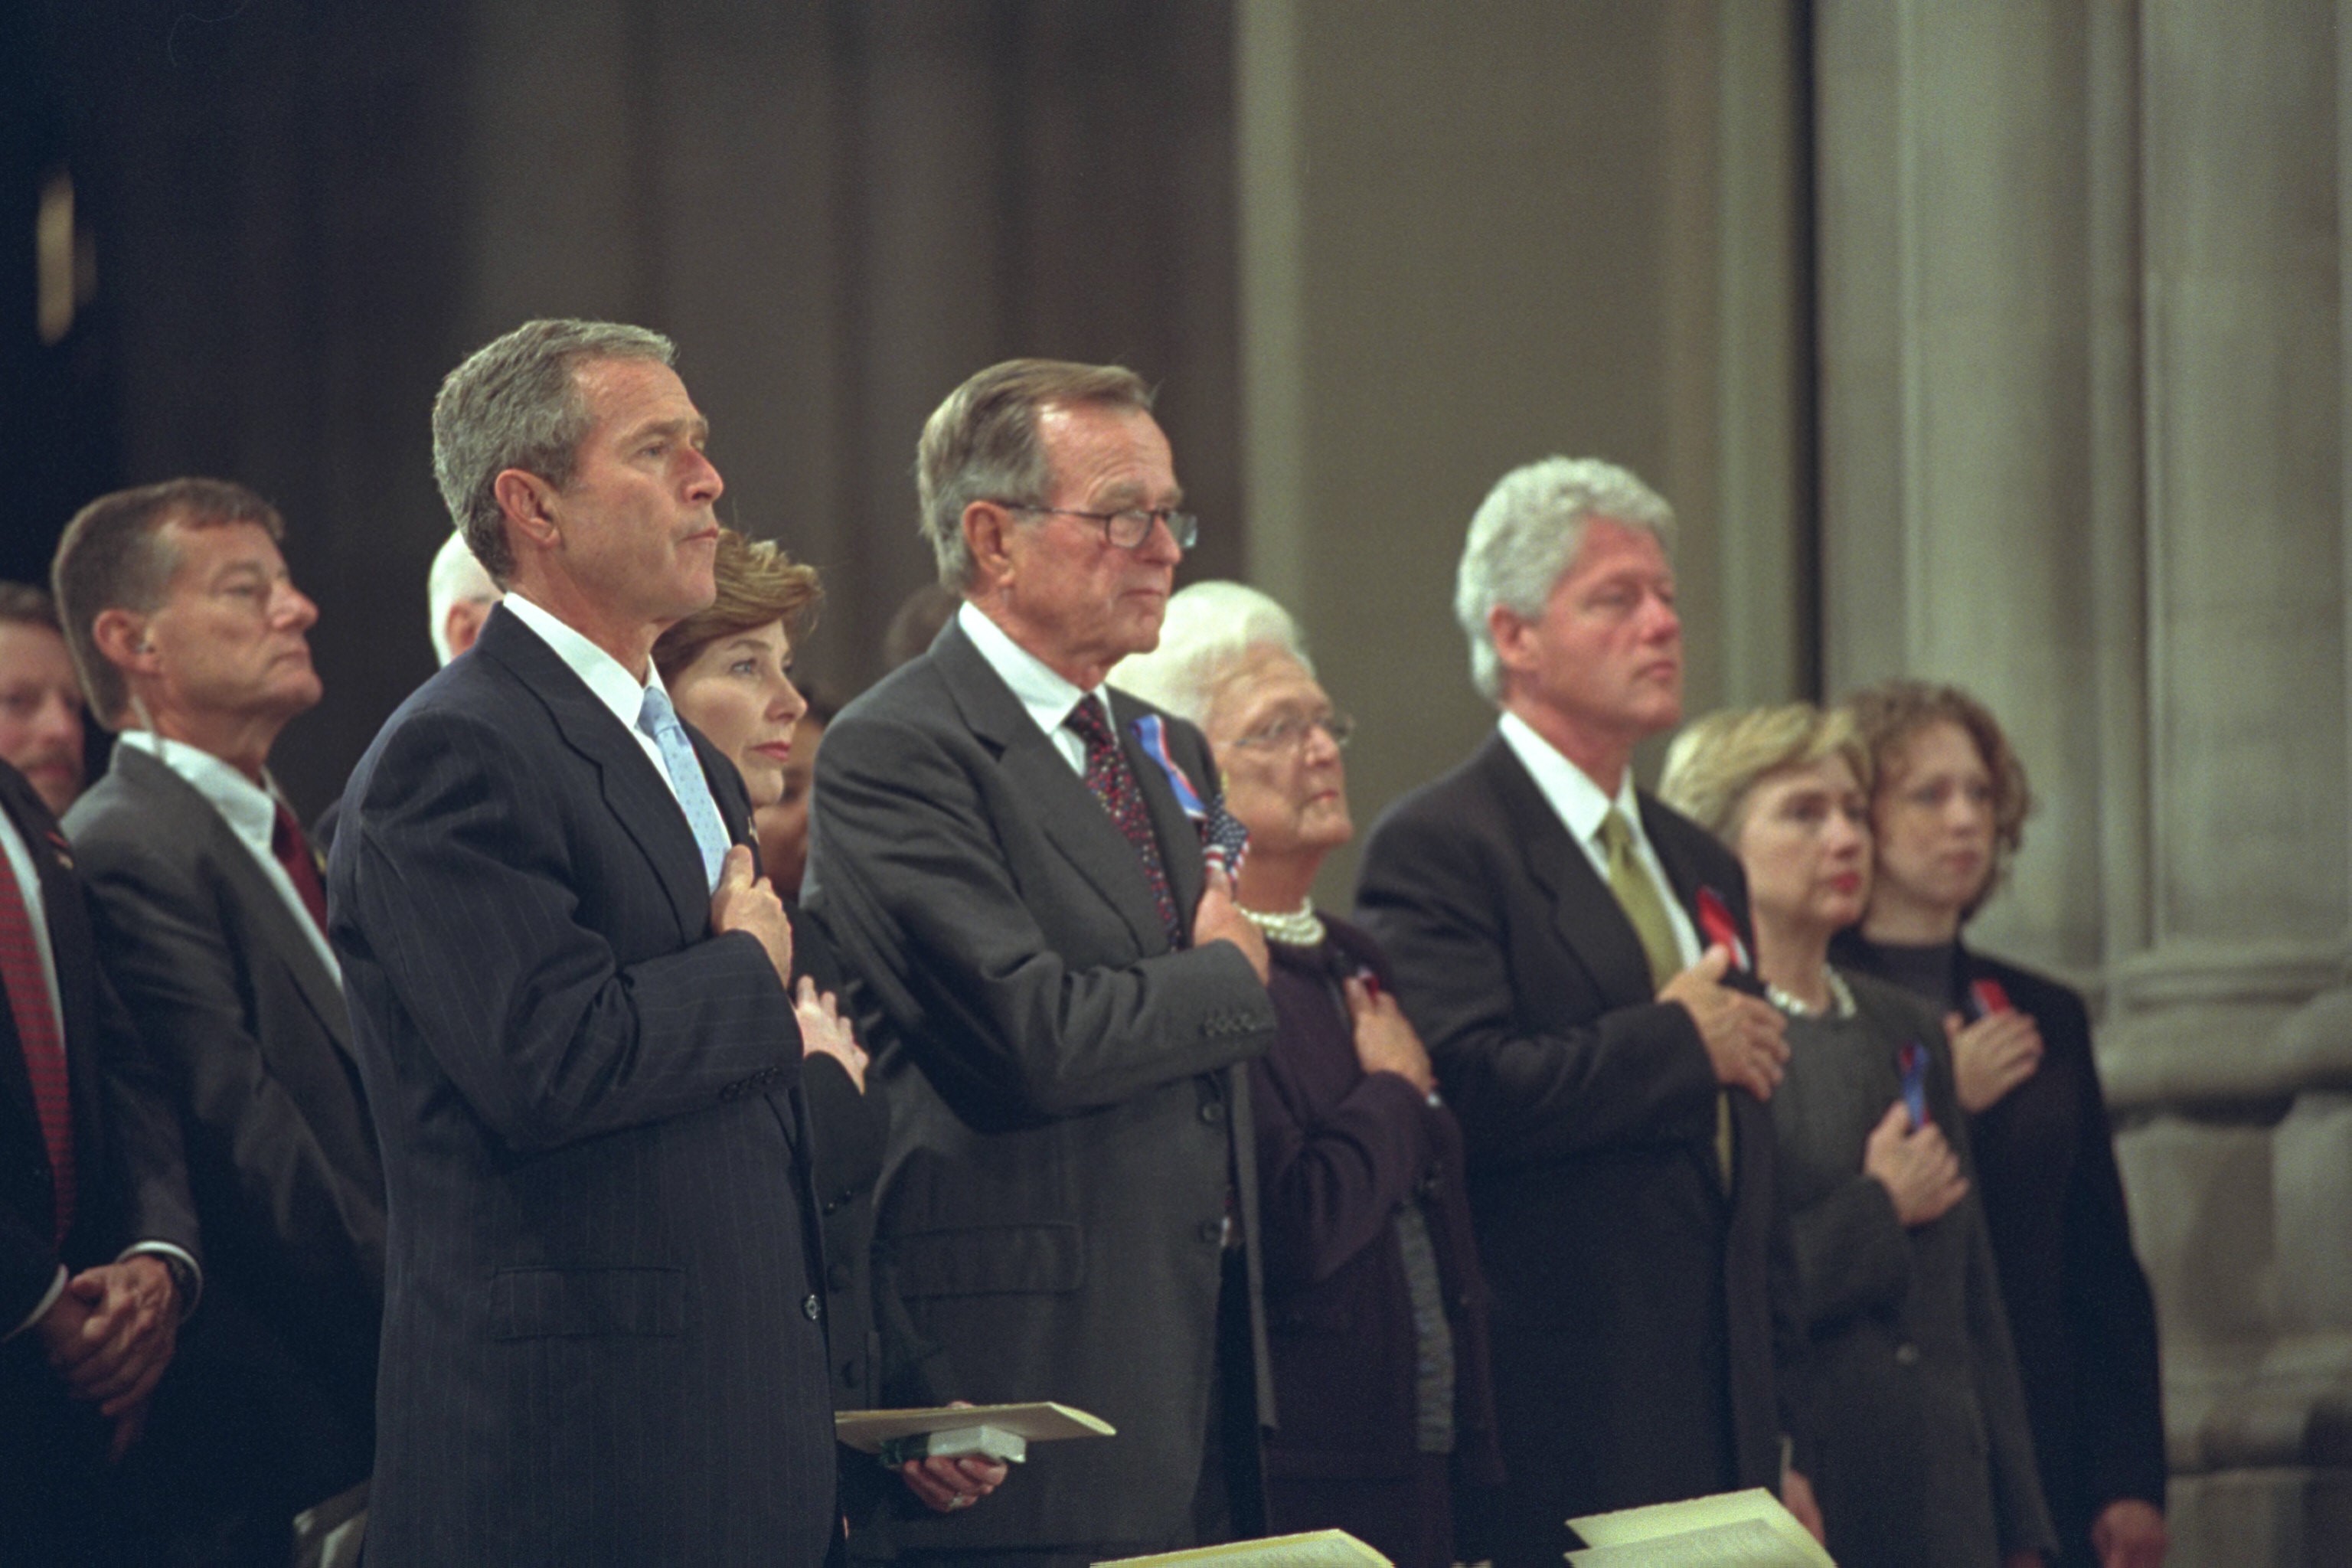 President George W. Bush, Mrs. Laura Bush, Former President George H. W. Bush, Mrs. Barbara Bush, Former President Bill Clinton, Sen. Hillary Rodham Clinton, and Chelsea Clinton, stand with hands over hearts for the Pledge of Allegiance during the National Day of Prayer and Remembrance service at the National Cathedral in Washington, DC.